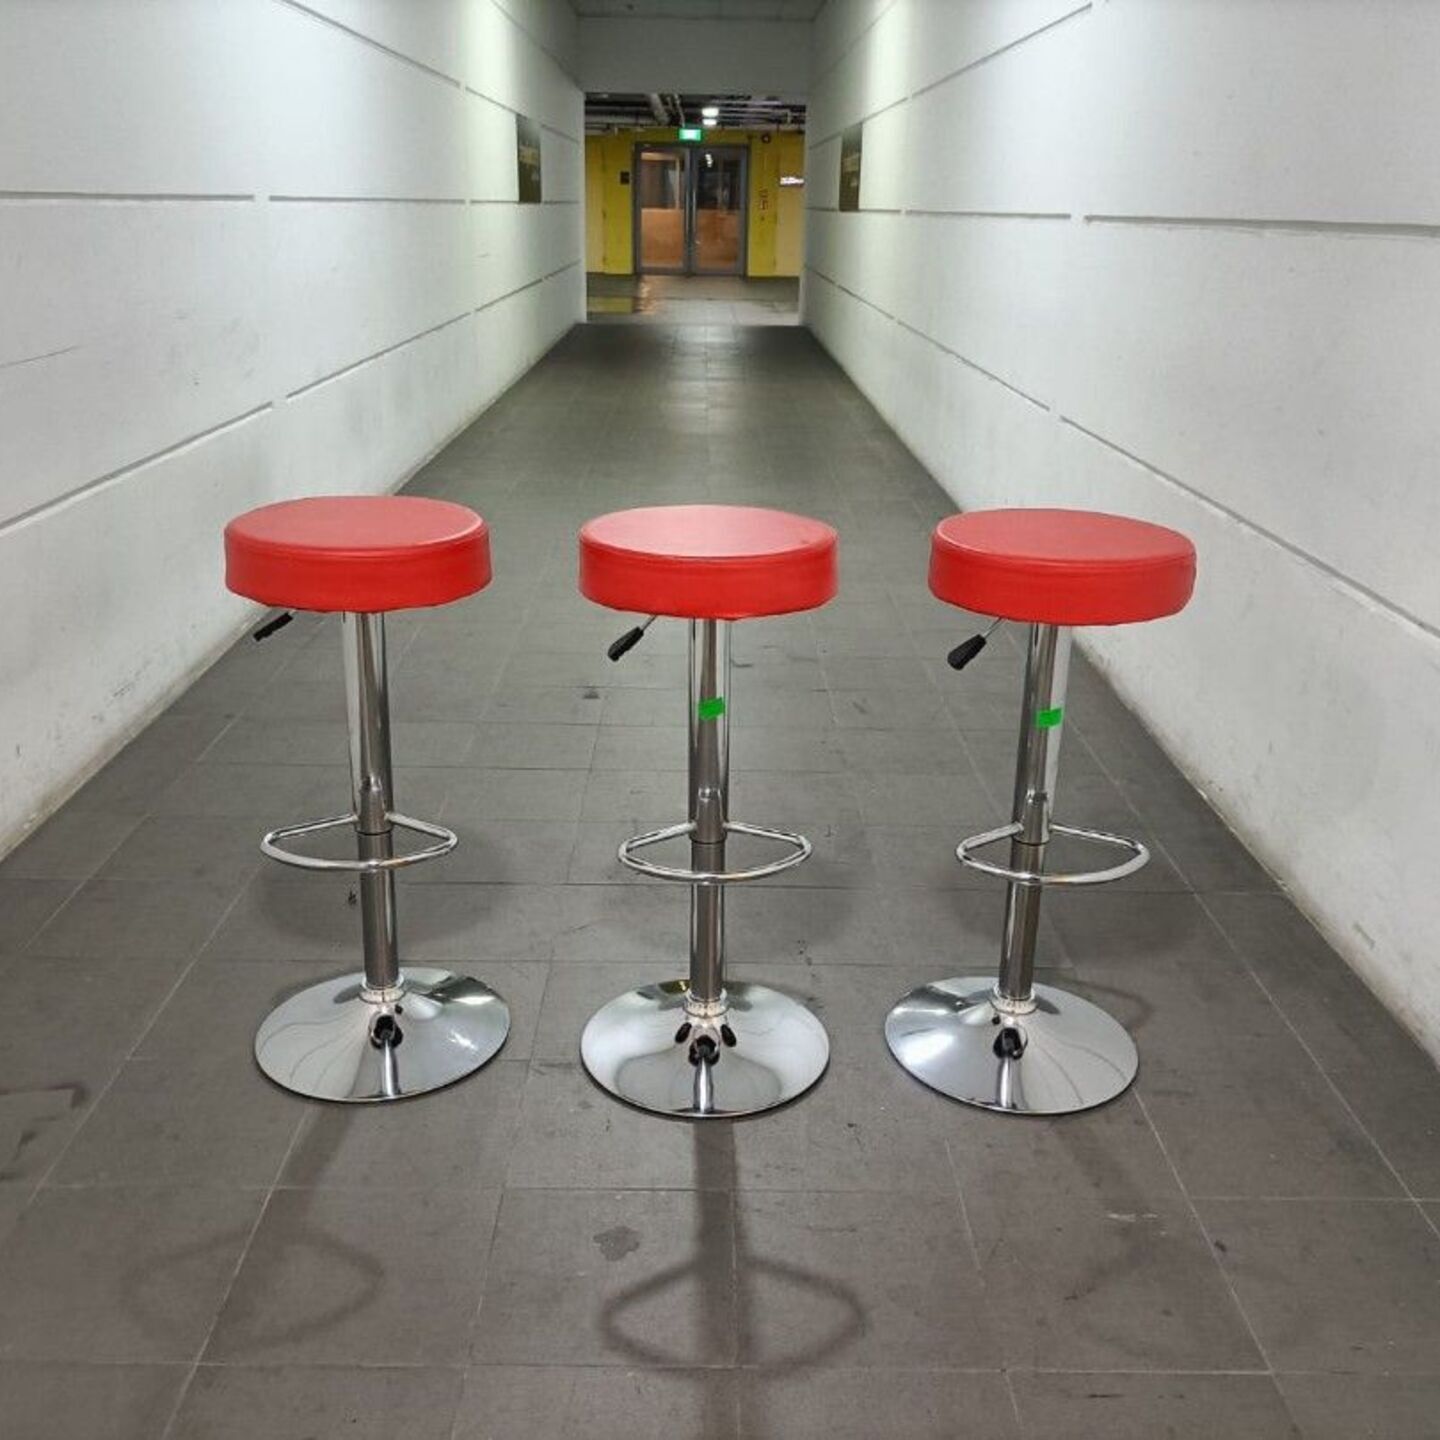 CAPS Bar Stools in RED - SET OF 3